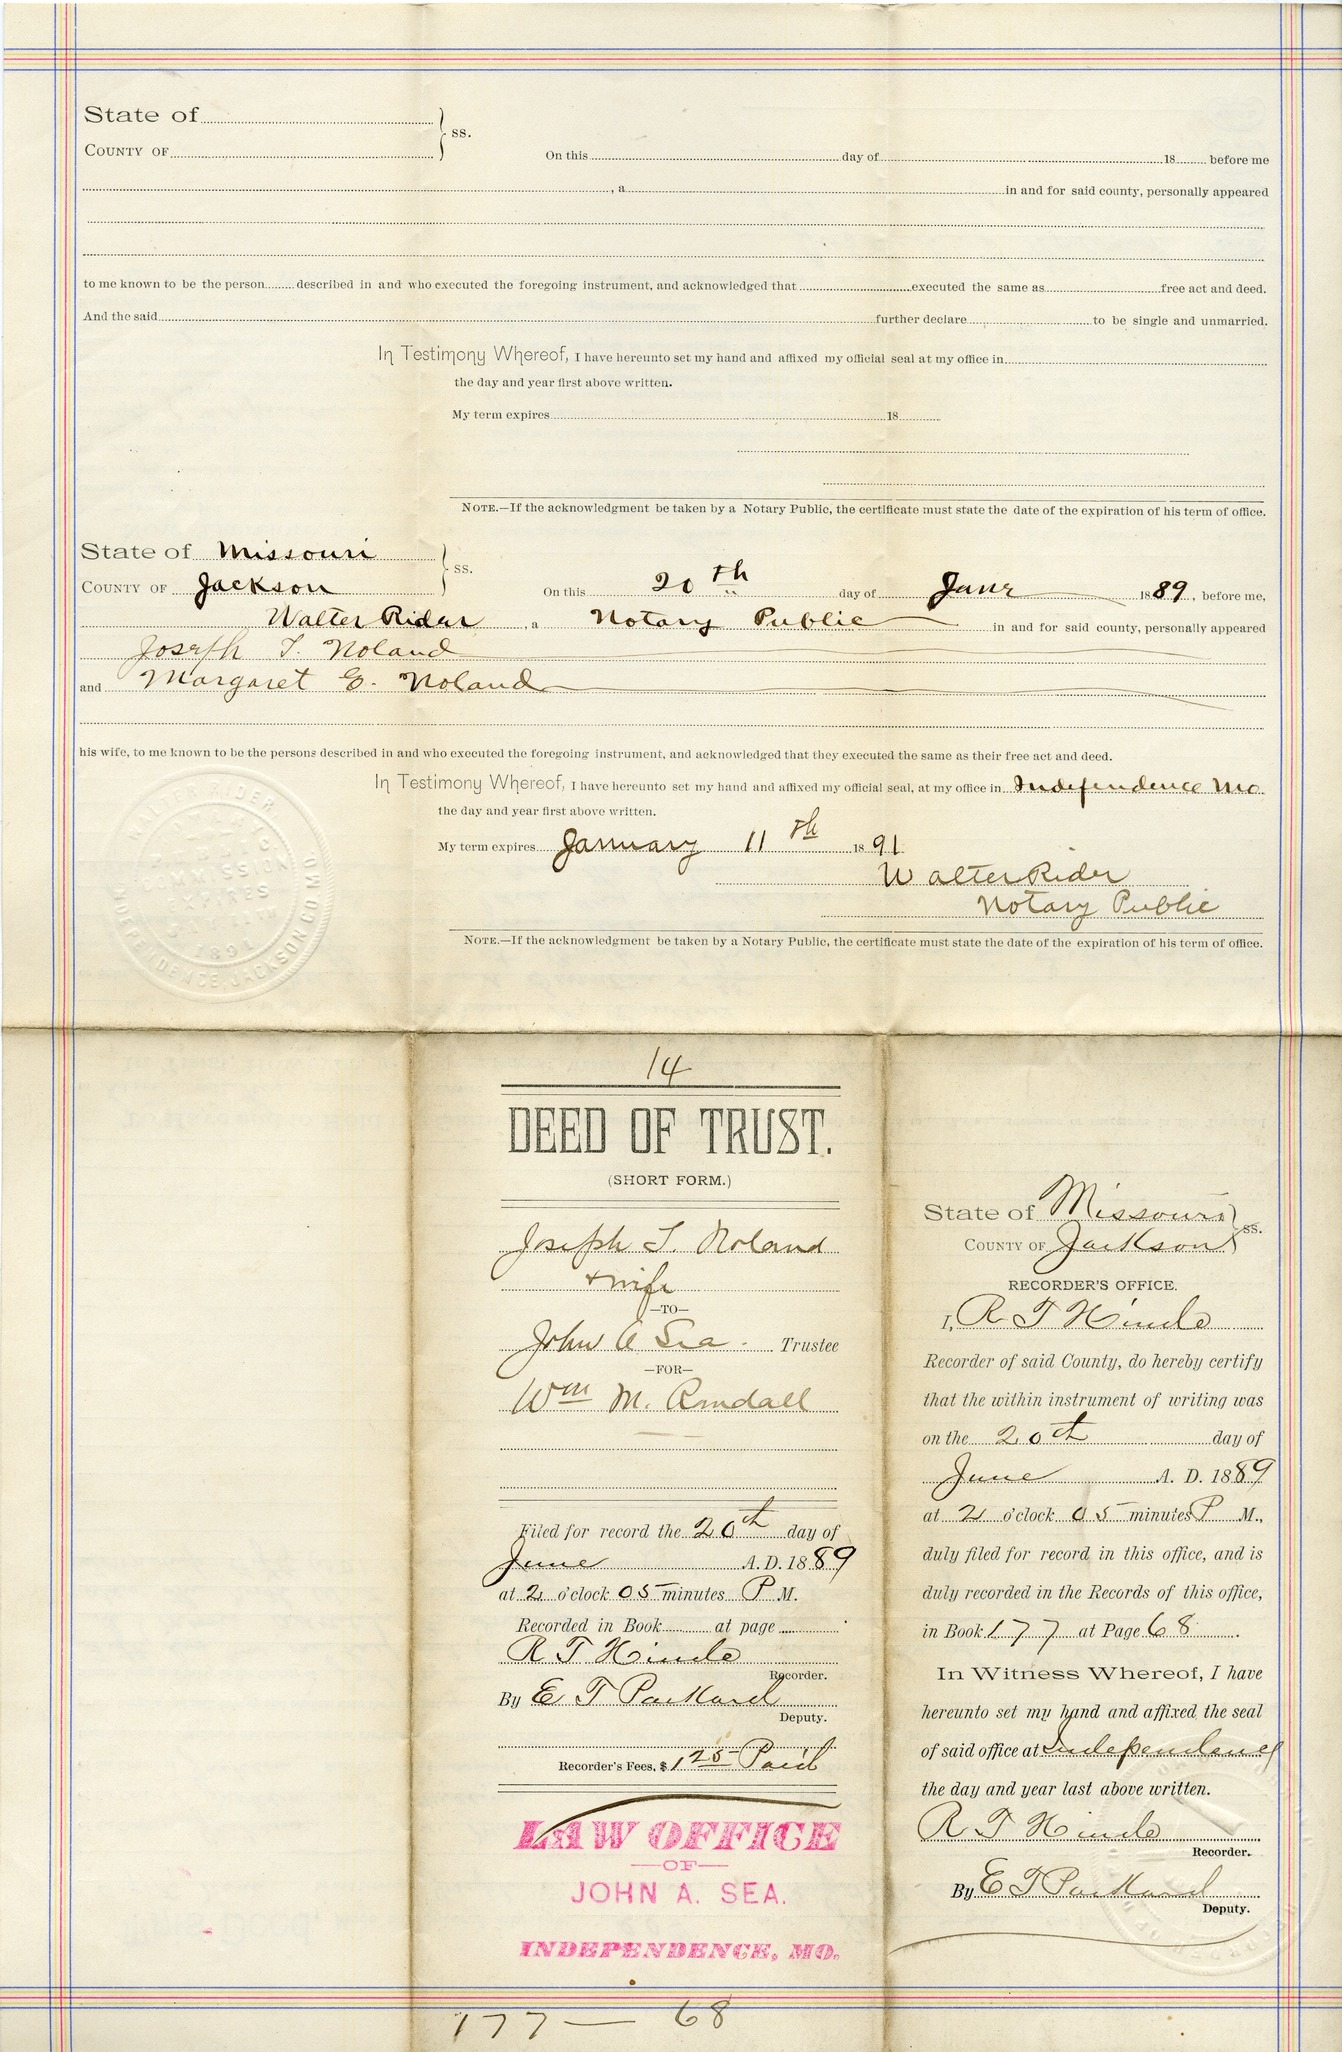 Deed of Trust from Joseph T. Noland to John A. Sea for William M. Randall